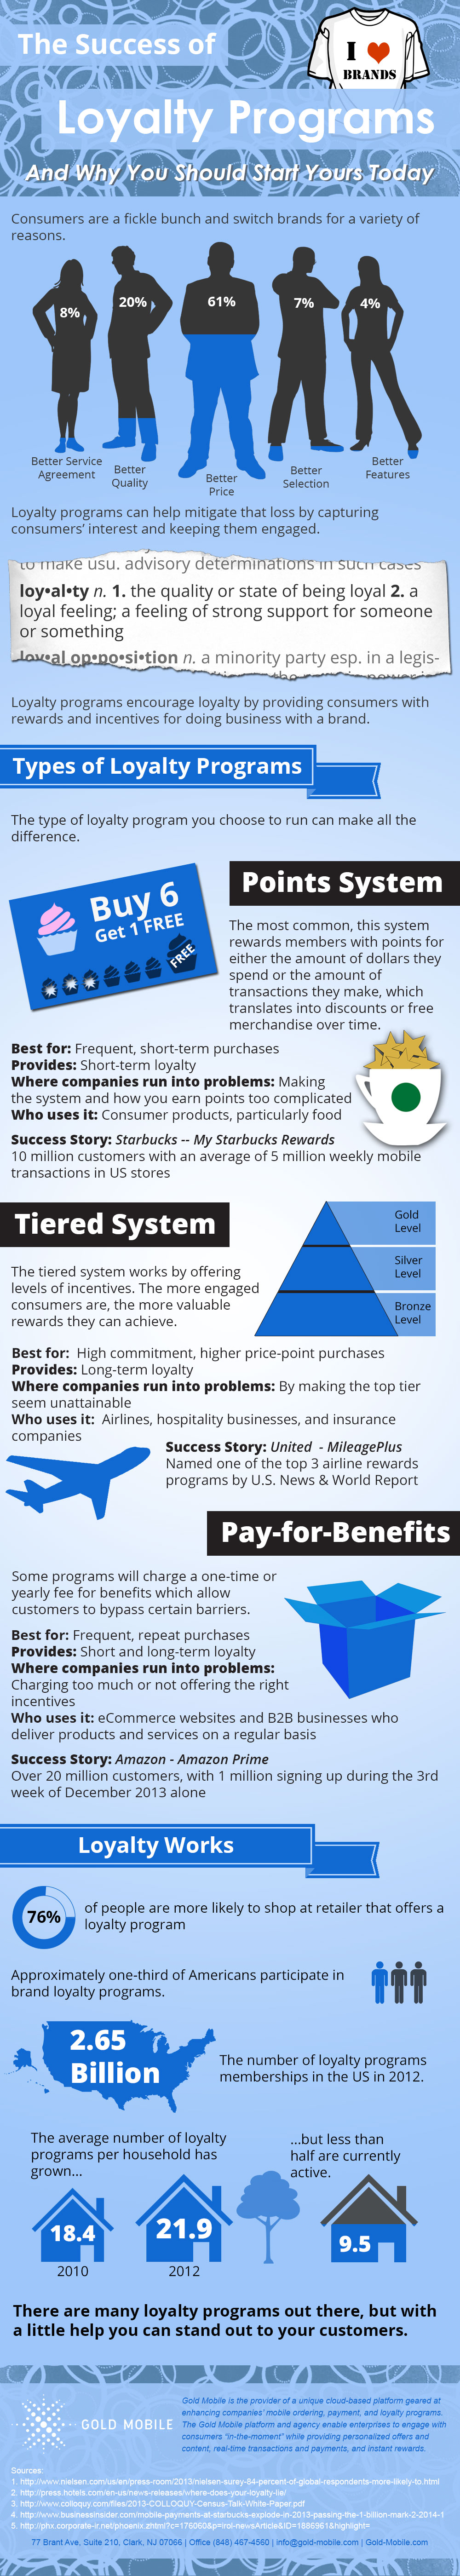 Infographic: The Success of Loyalty Programs